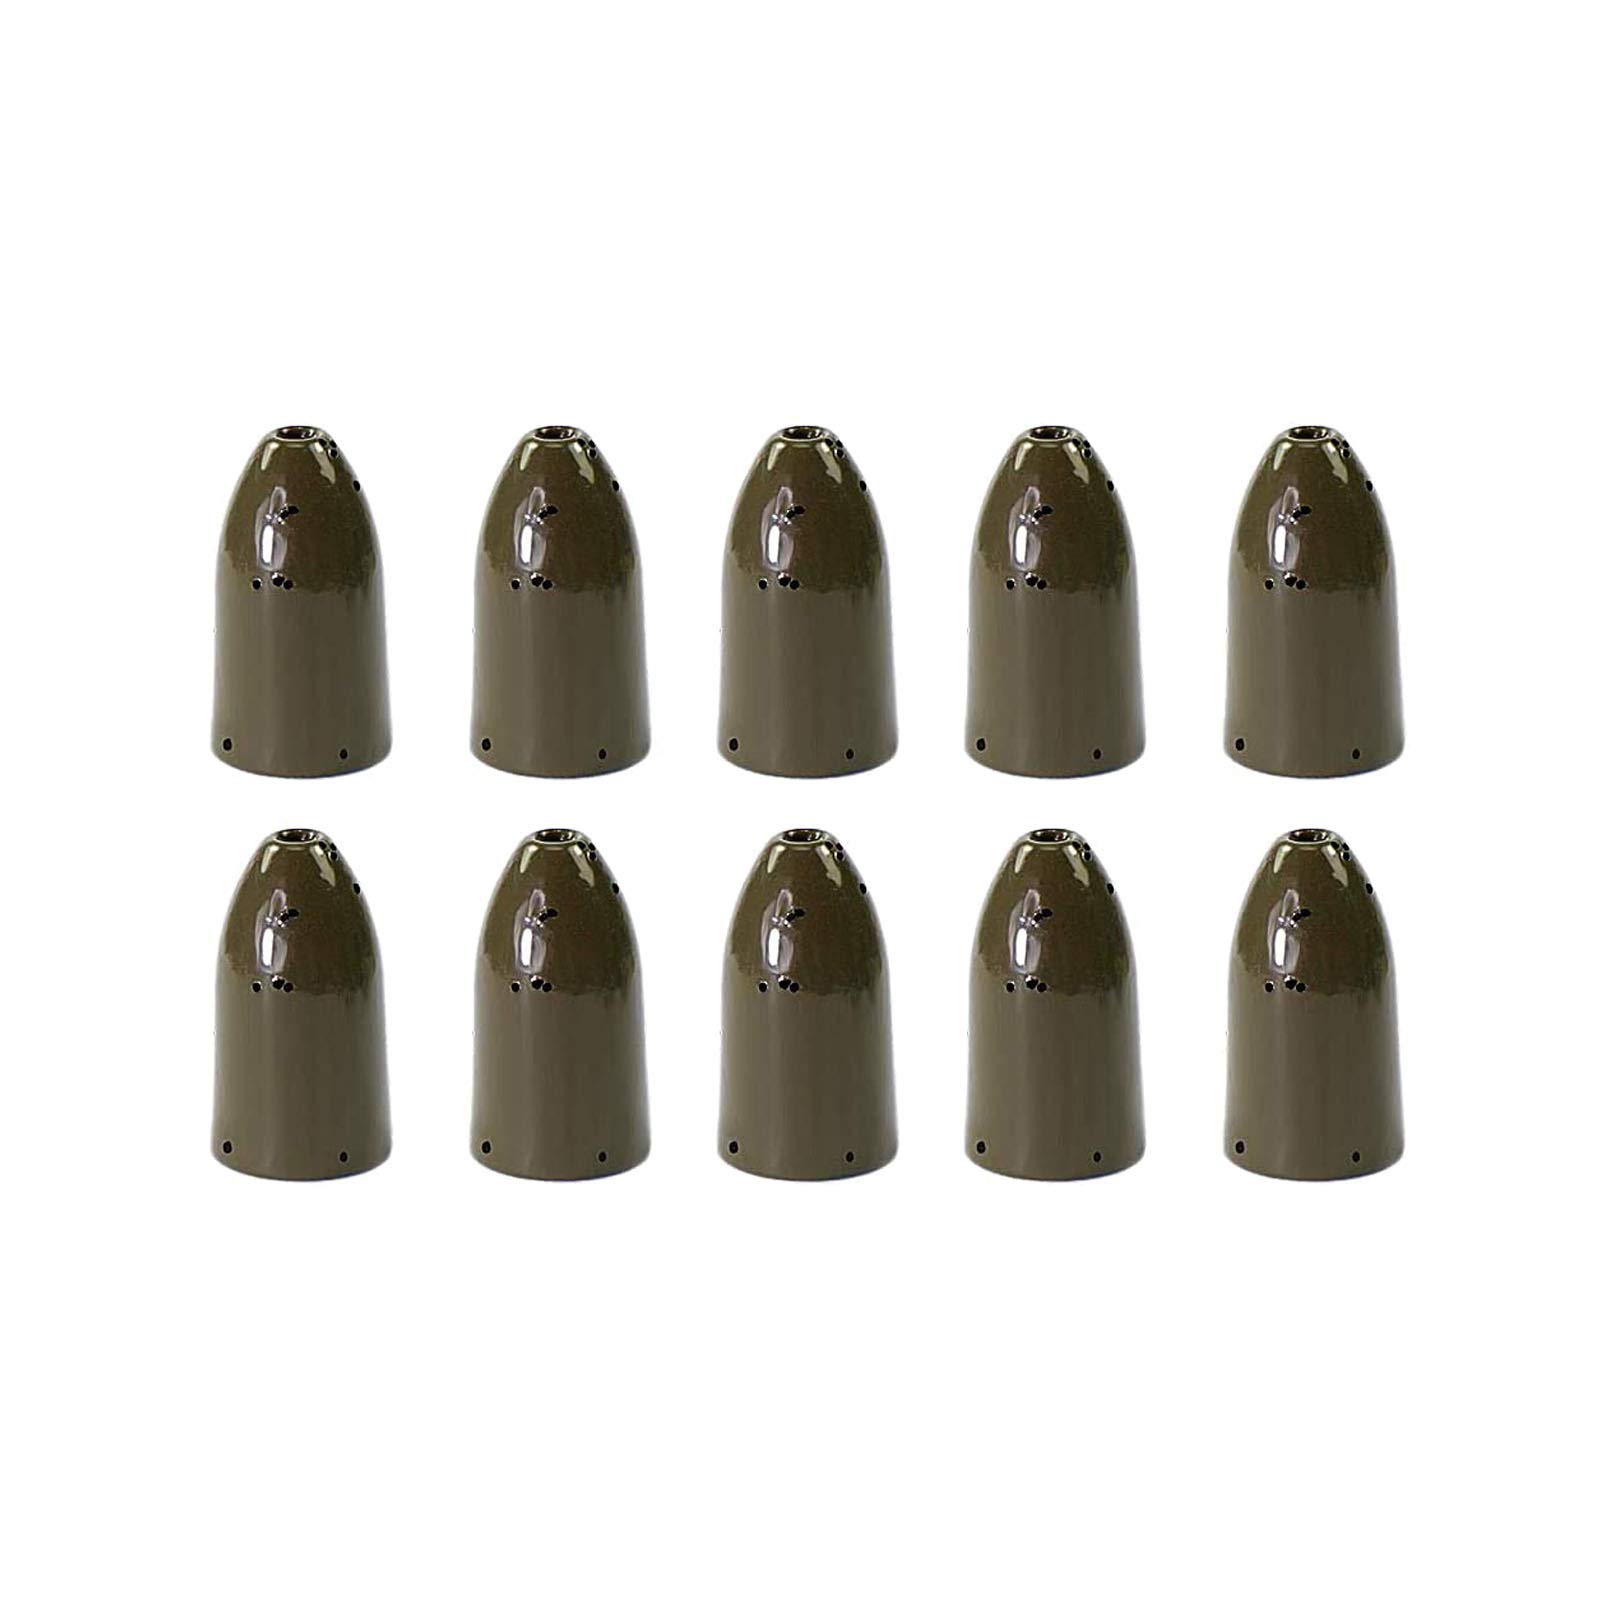 Croch 10 Pack Tungsten Fishing Weight for Bass Fishing Pitching